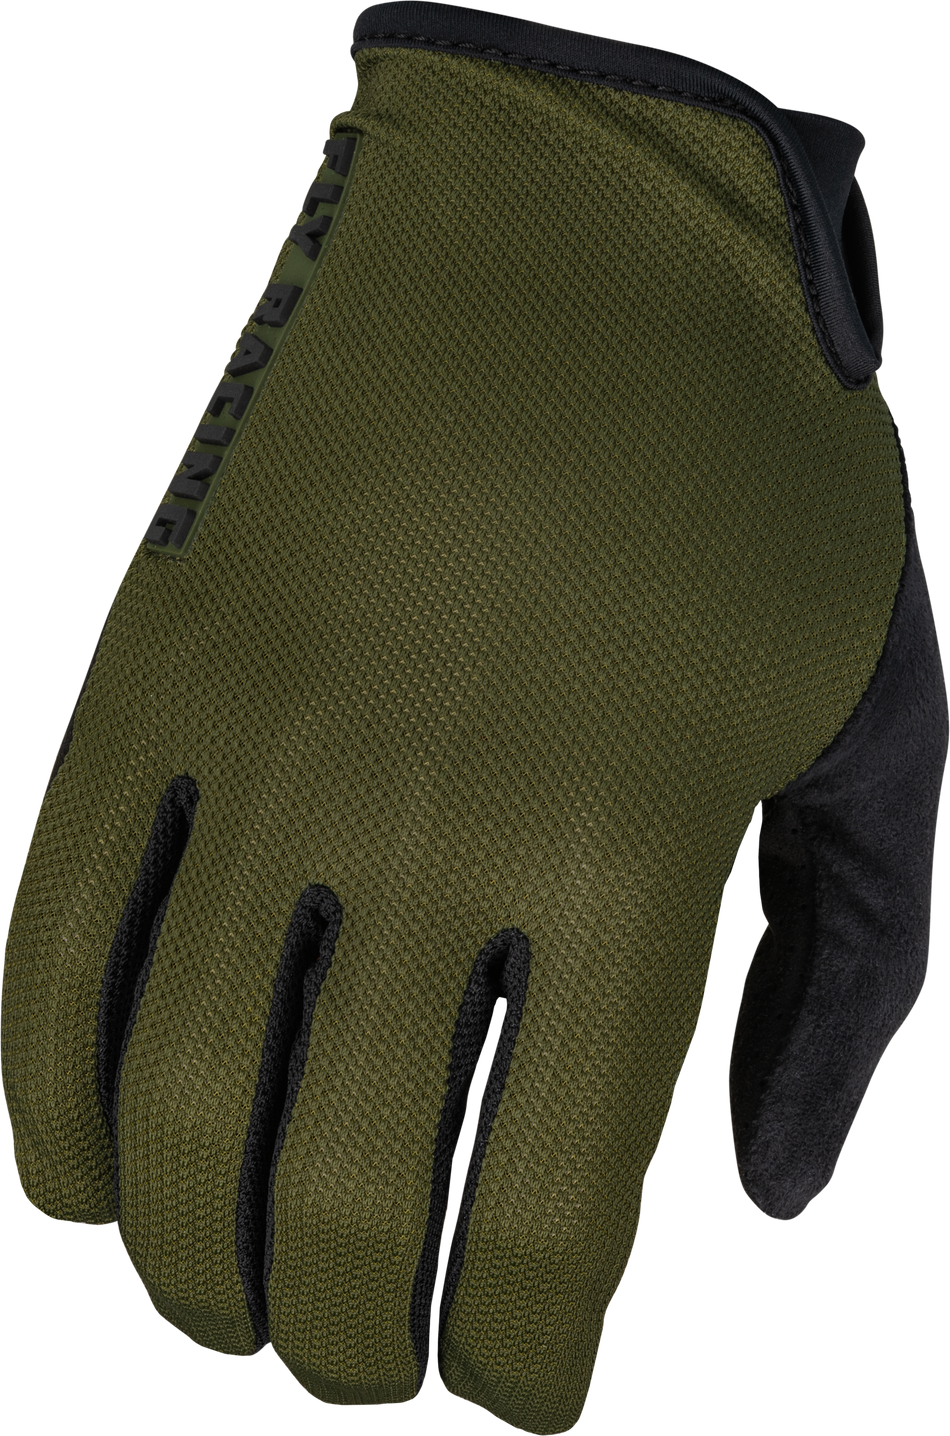 FLY RACING Mesh Gloves Dark Forest Sm 375-305S